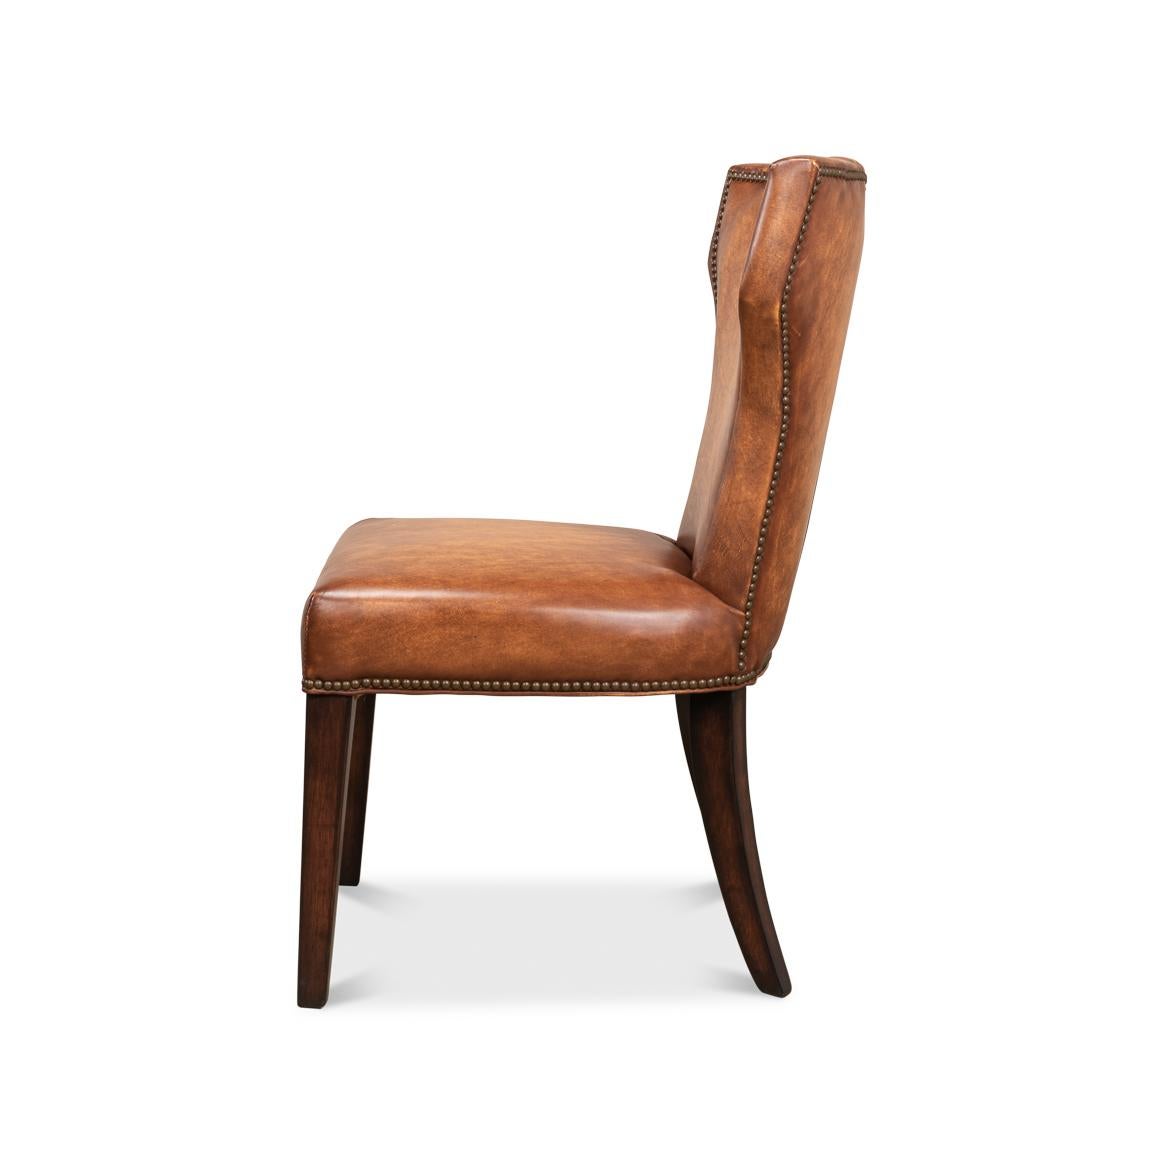 American Classical Cognac Leather Dining Chair For Sale